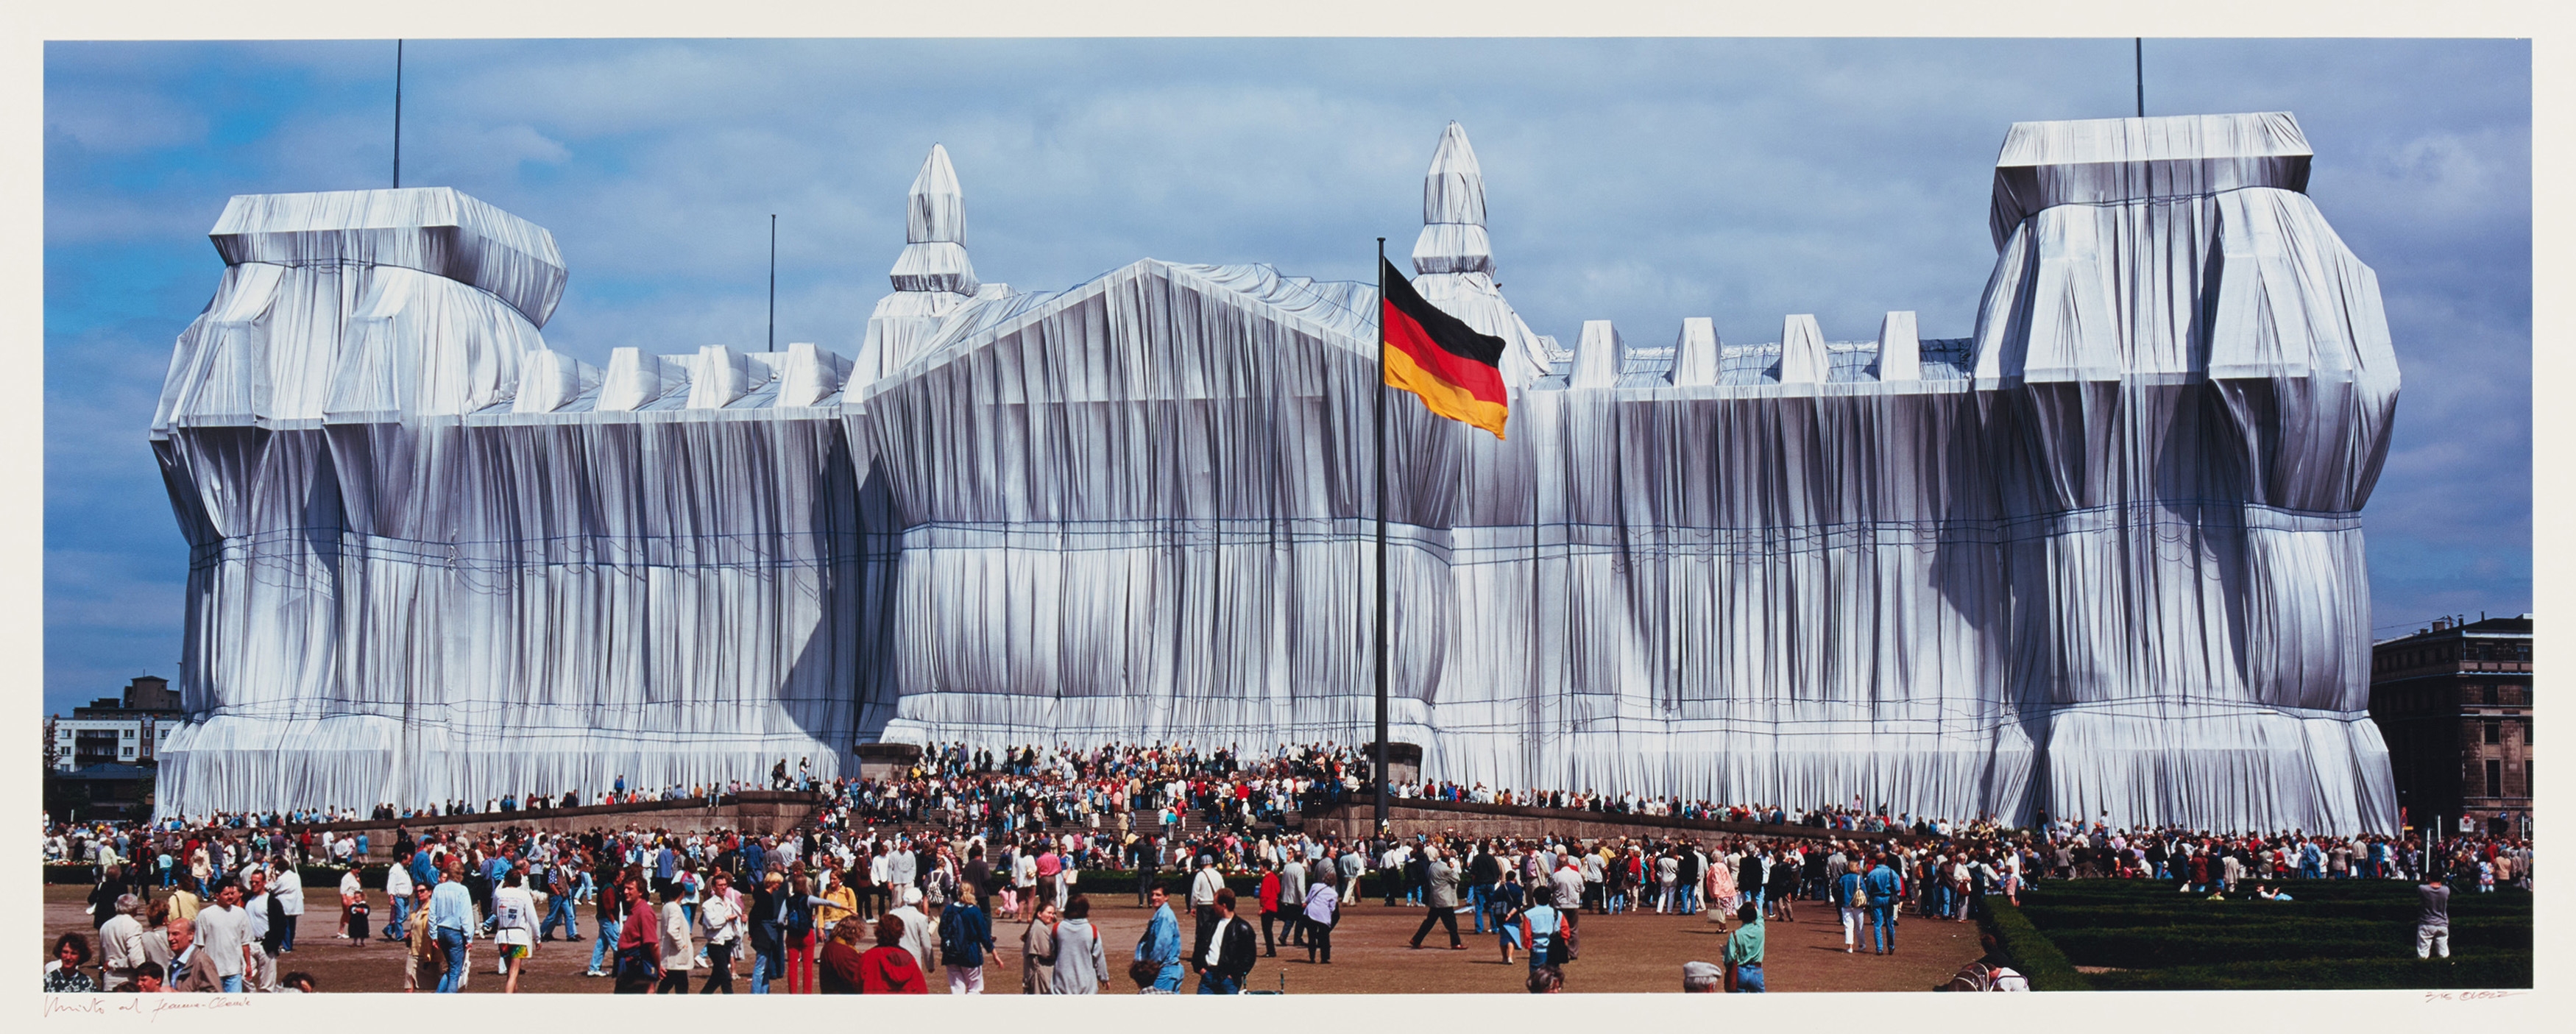 Artwork by Wolfgang Volz, Wrapped Reichstag, Project for Berlin., Made of C-print laid down on aluminium